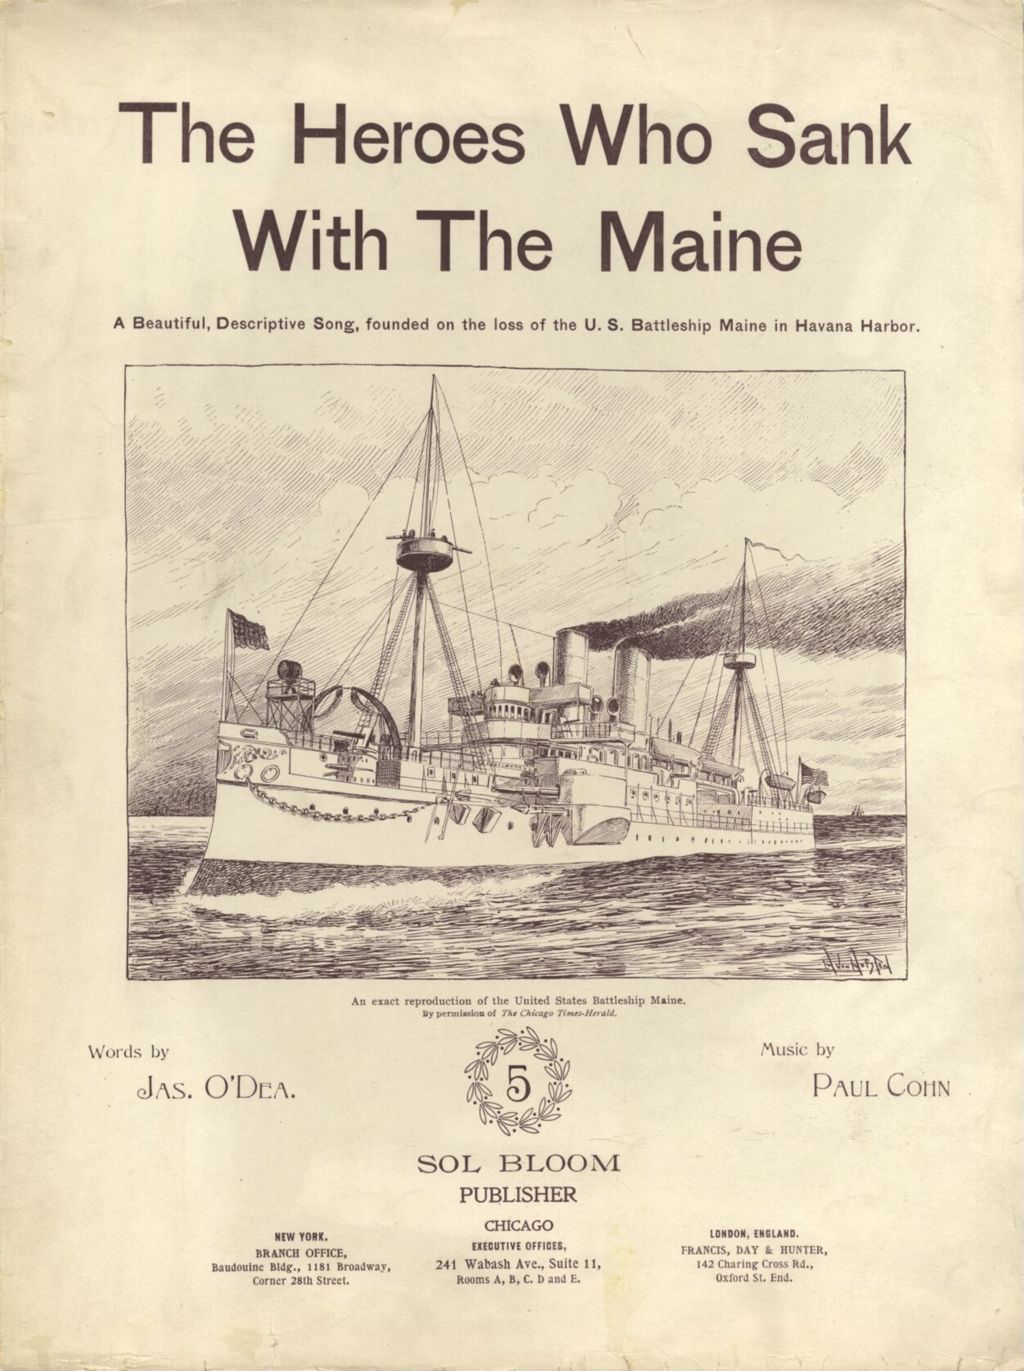 Miniature of Heroes Who Sank With the Maine